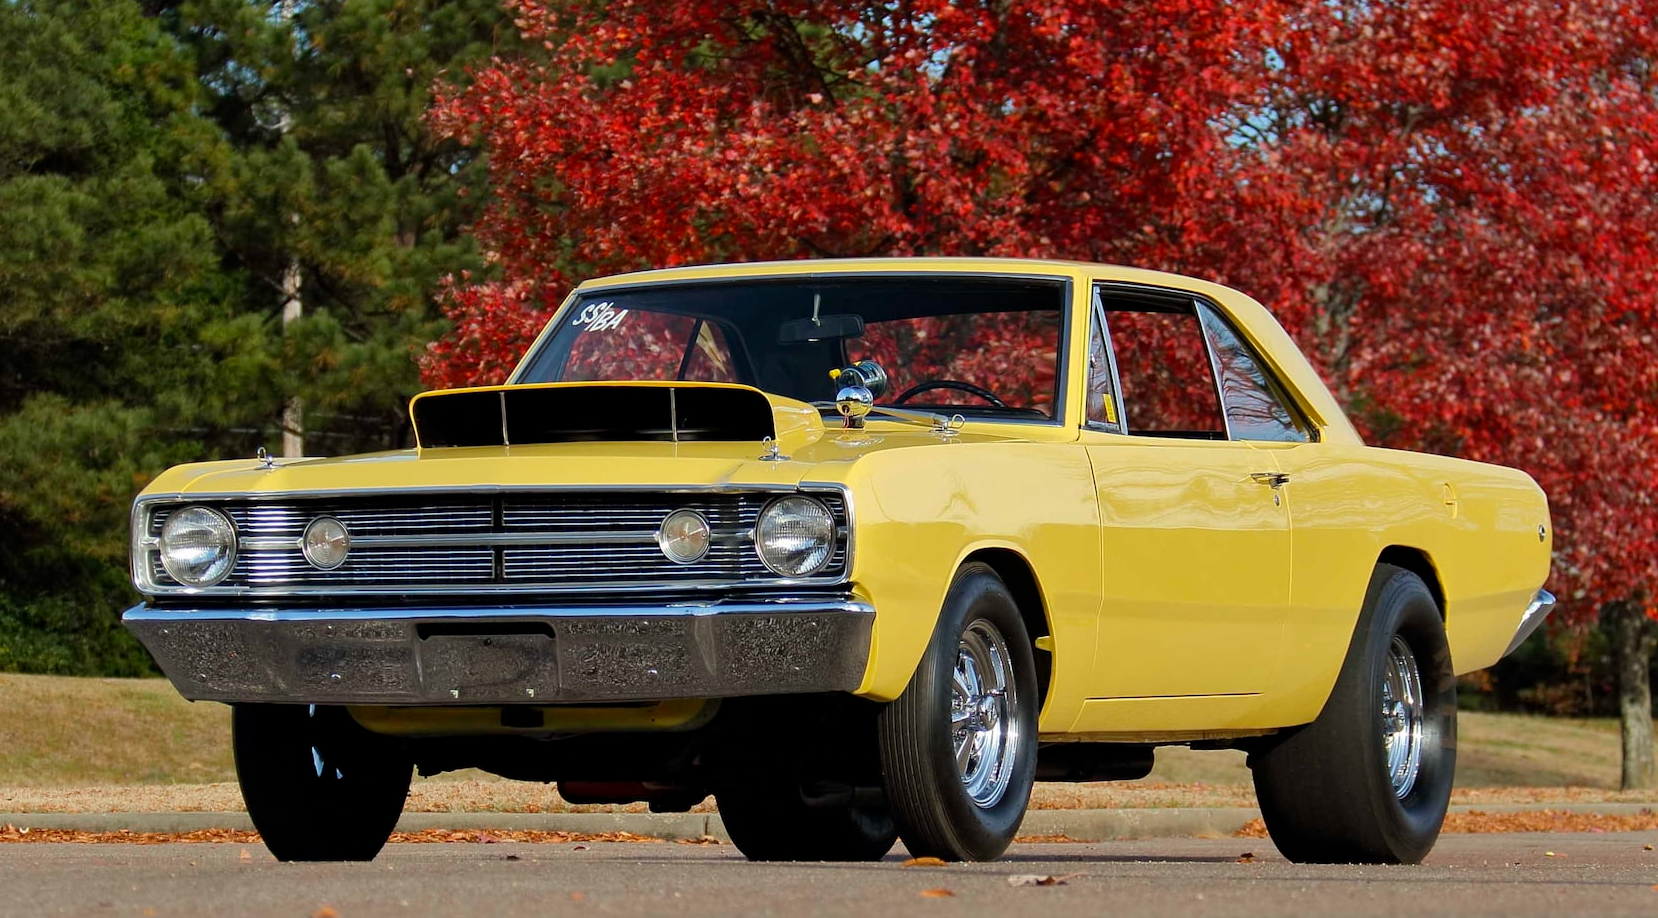 Yellow 1968 Dodge Dart LO23 parked outdoor